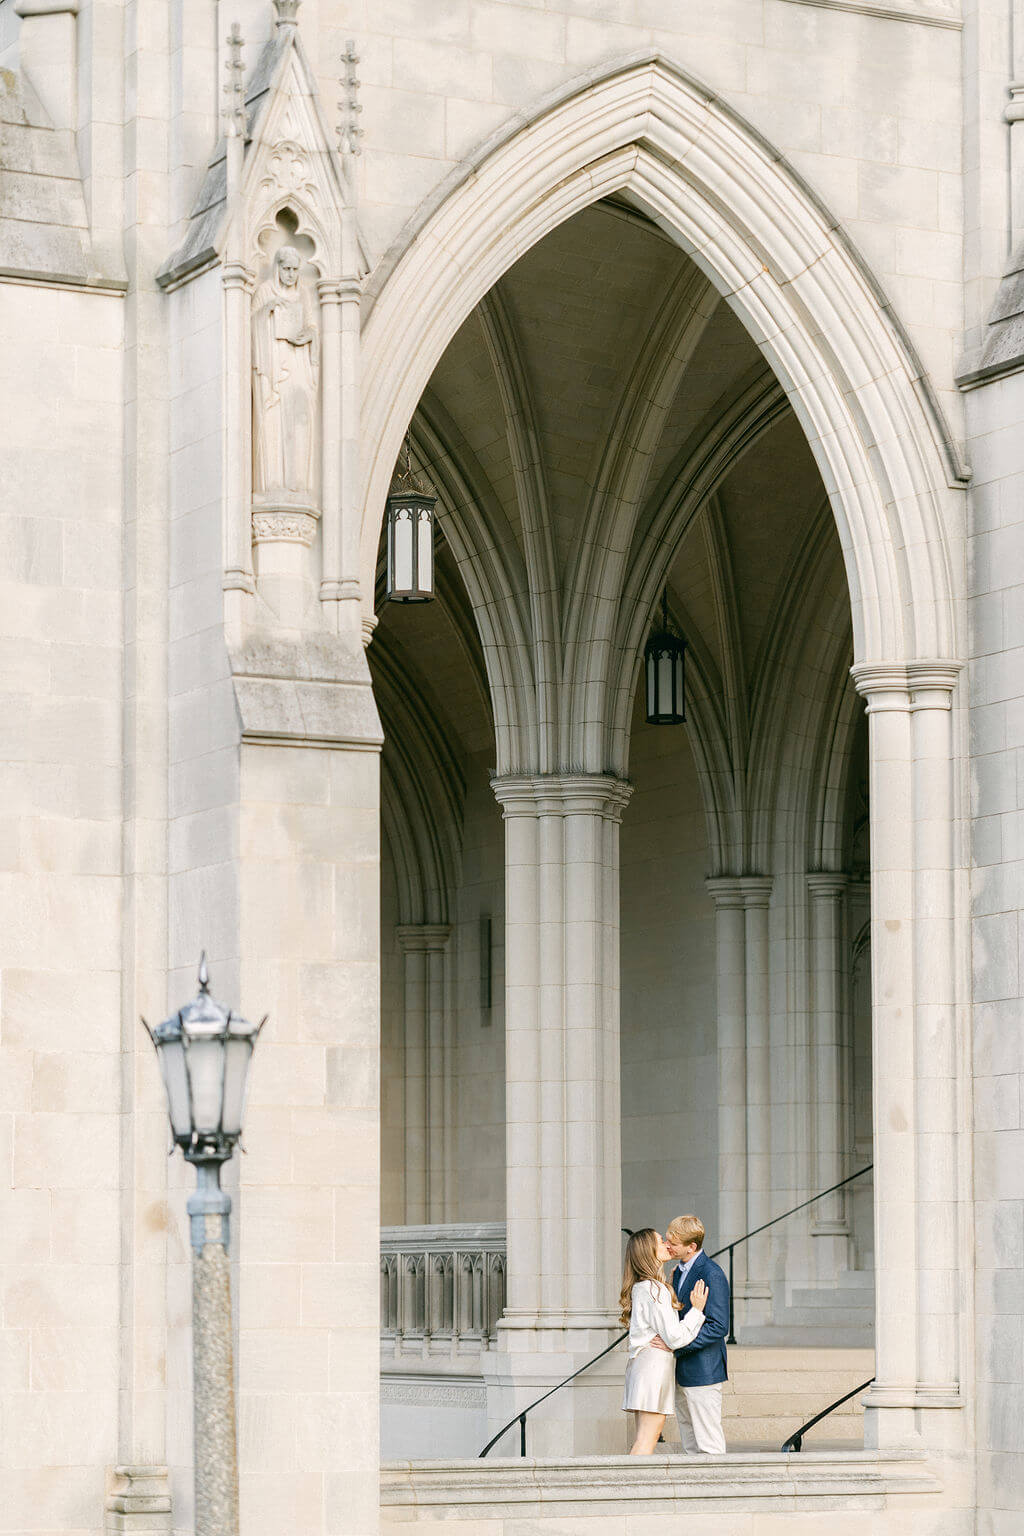 A photo of a couple sharing a moment on the steps within an arched corridor of the Washington National Cathedral, with the intricate gothic architecture surrounding them, taken by Get Ready Photo